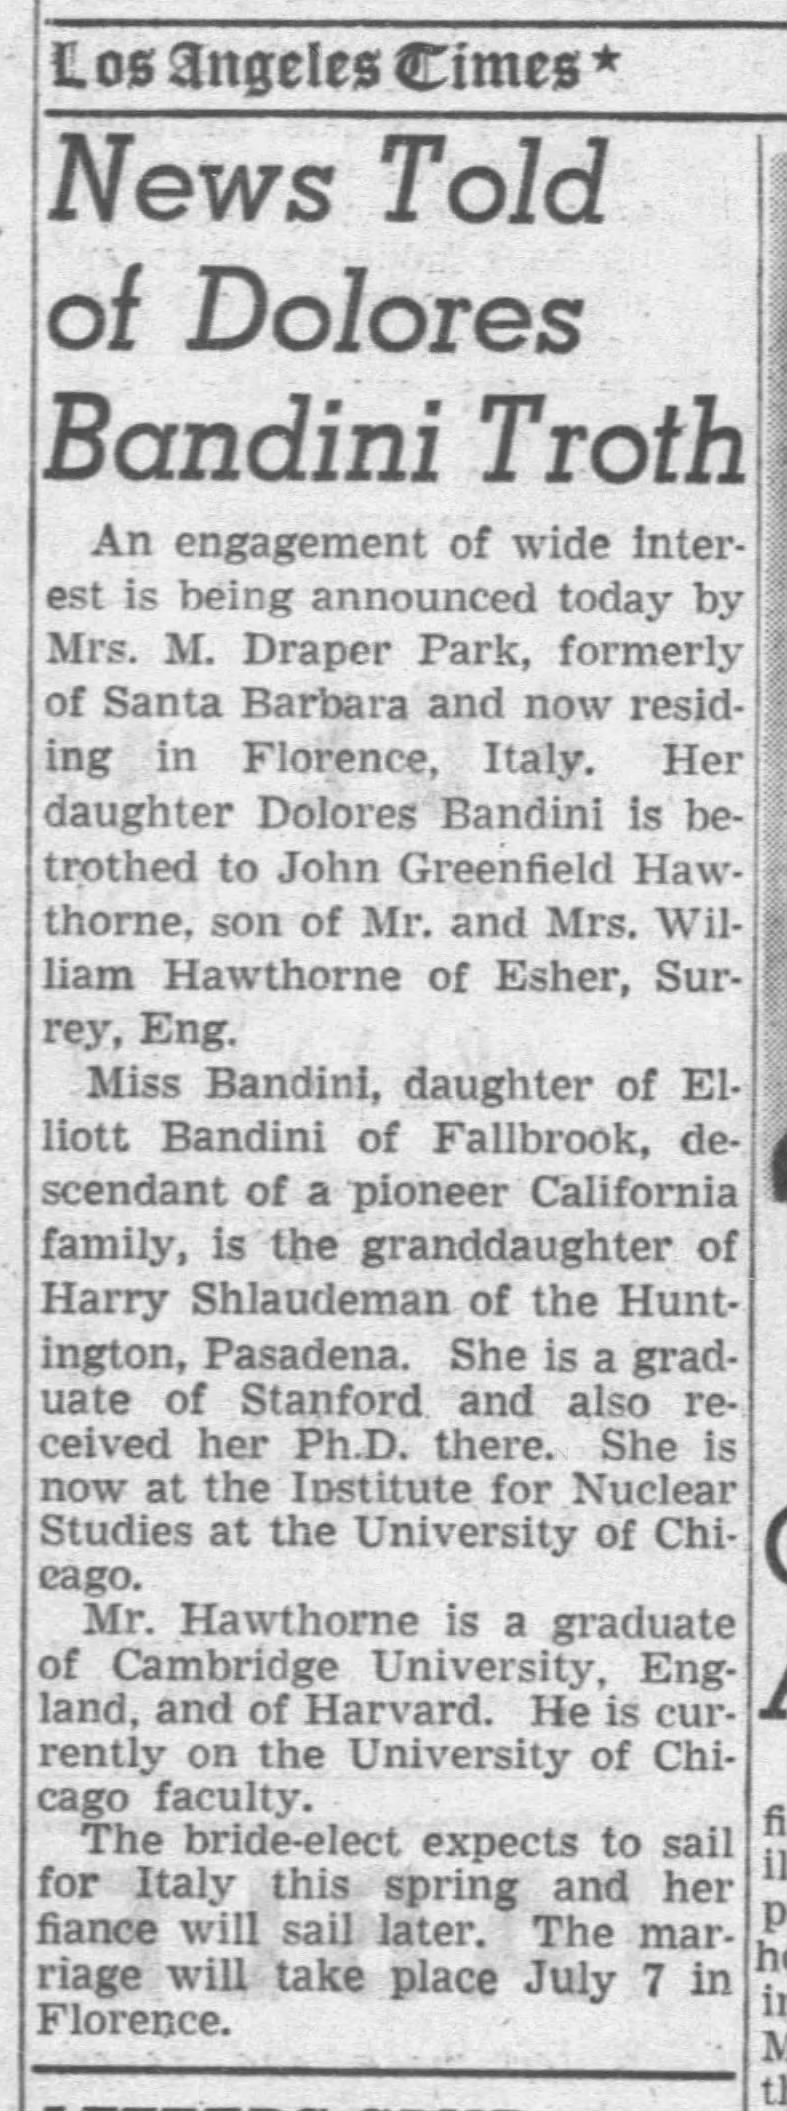 News Told of Dolores Bandini Troth